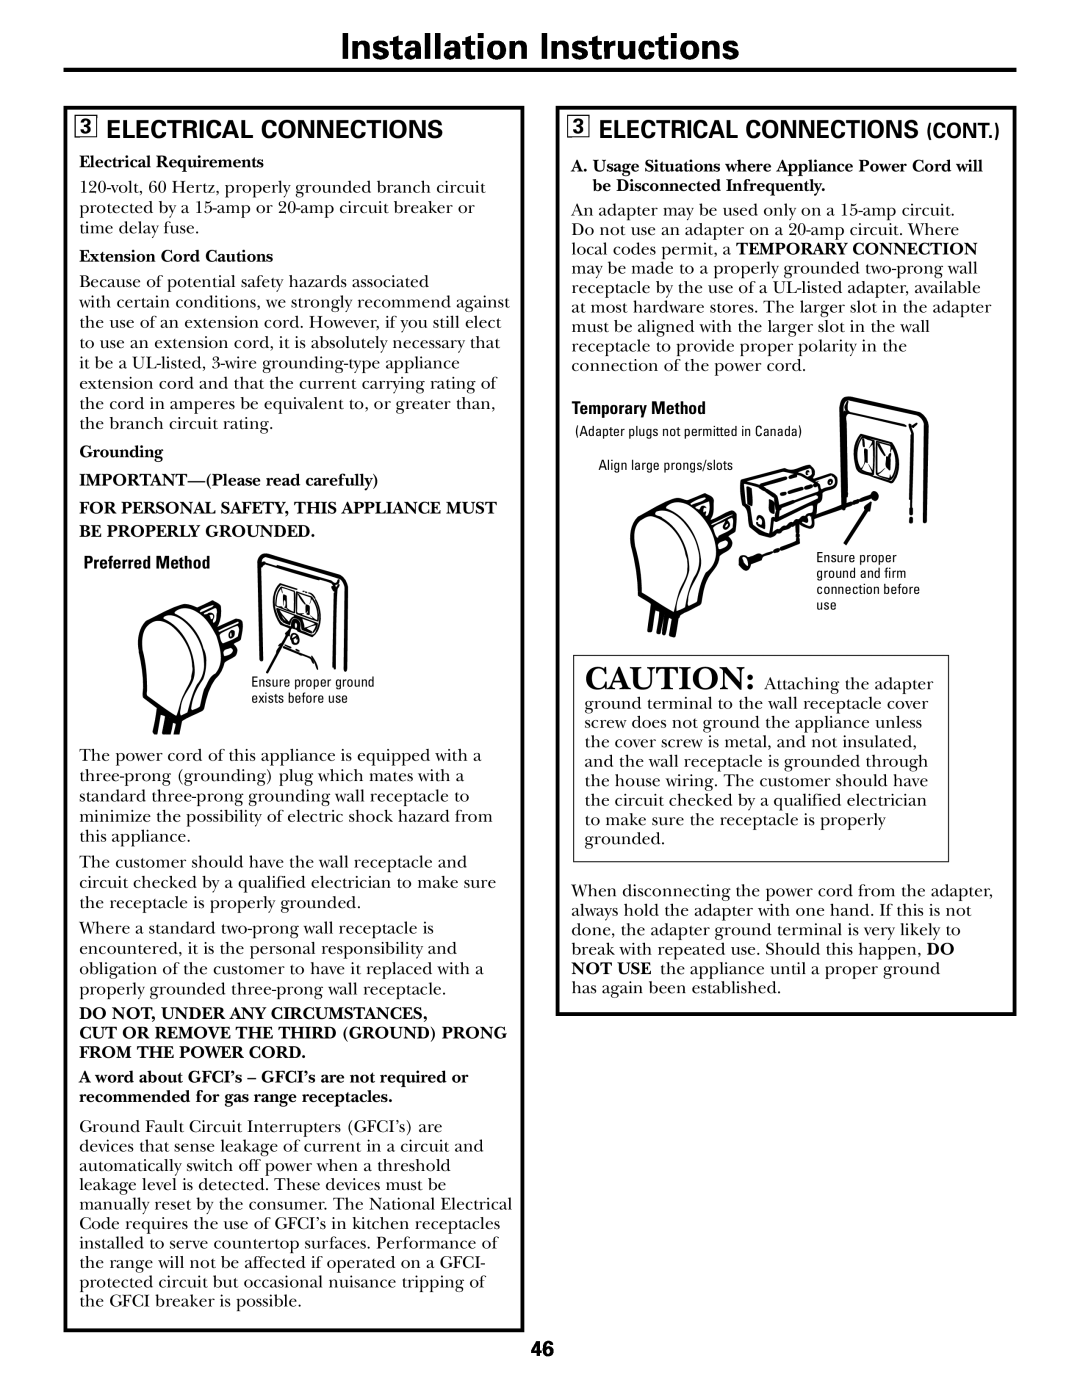 GE JGB905, JGB915 3ELECTRICAL CONNECTIONS CONT, Installation Instructions, Preferred Method, Temporary Method 